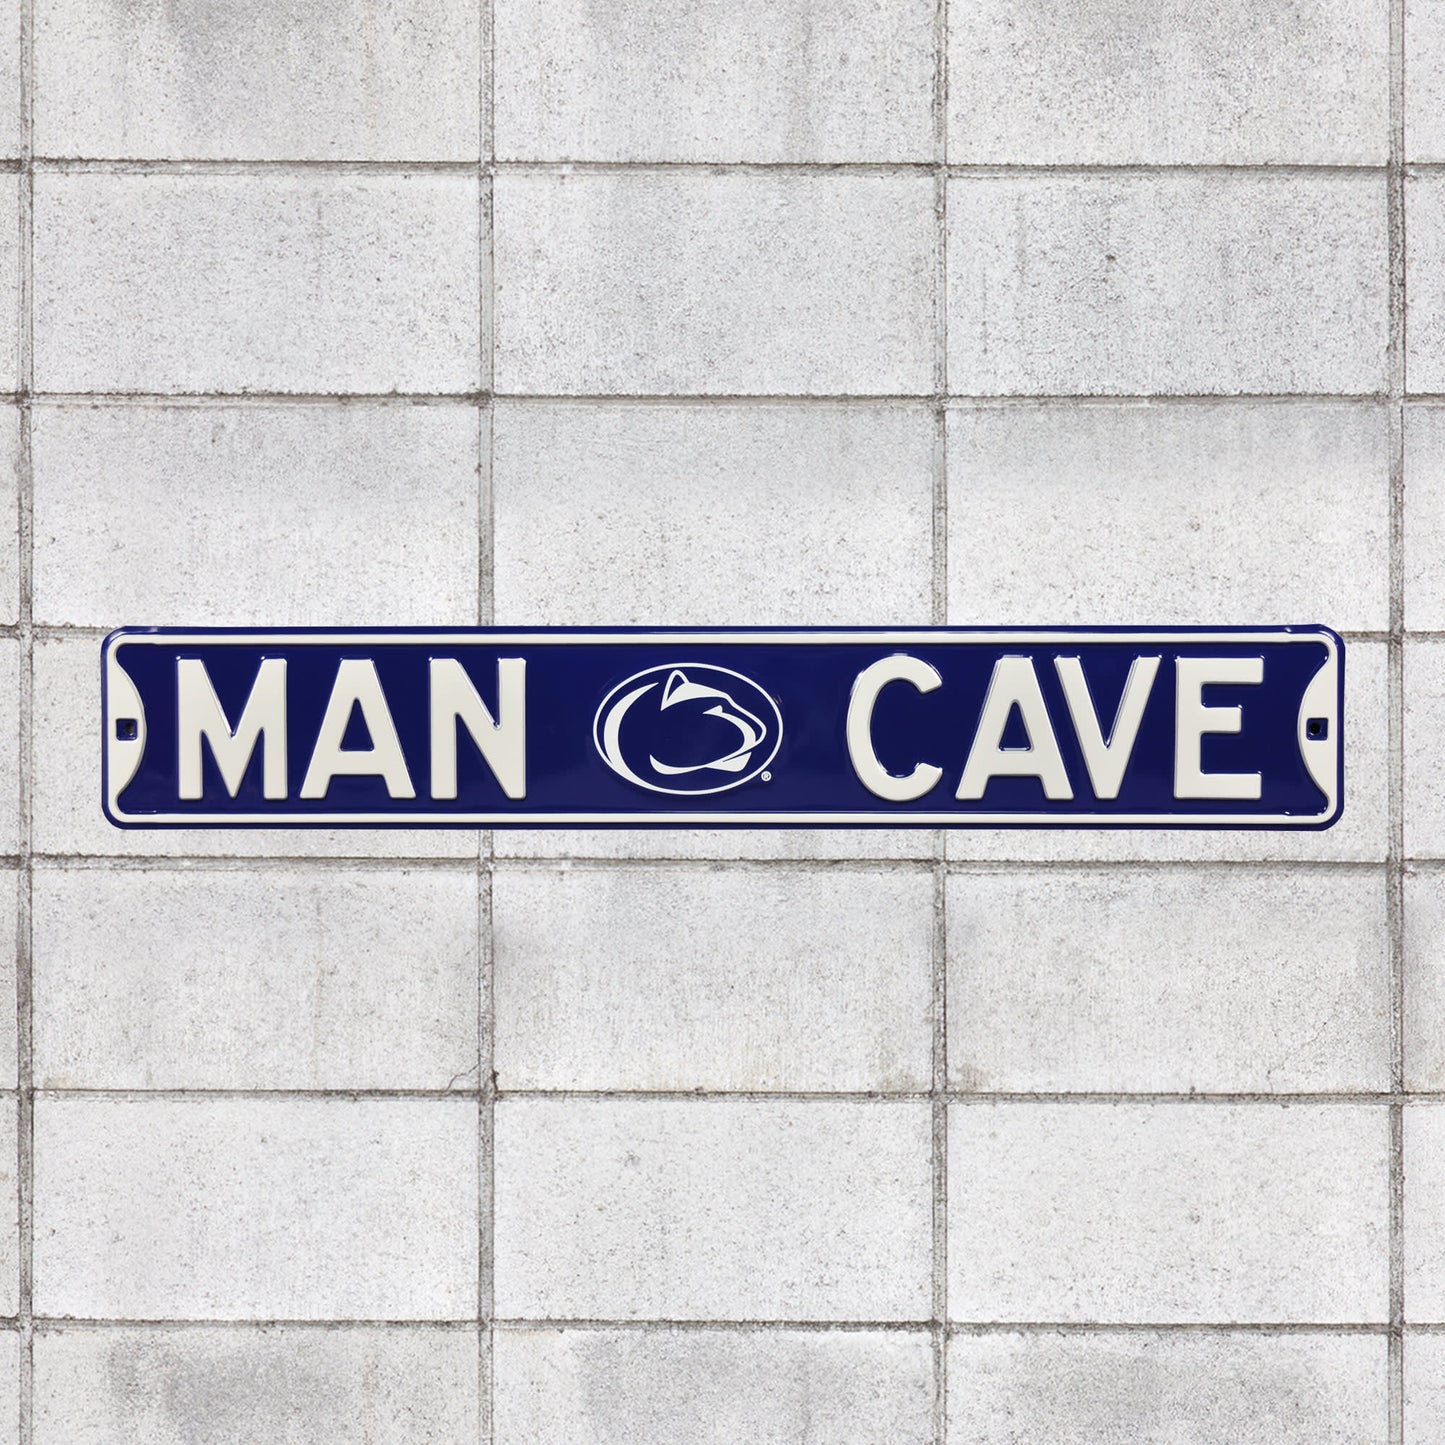 Penn State Nittany Lions: Man Cave - Officially Licensed Metal Street Sign